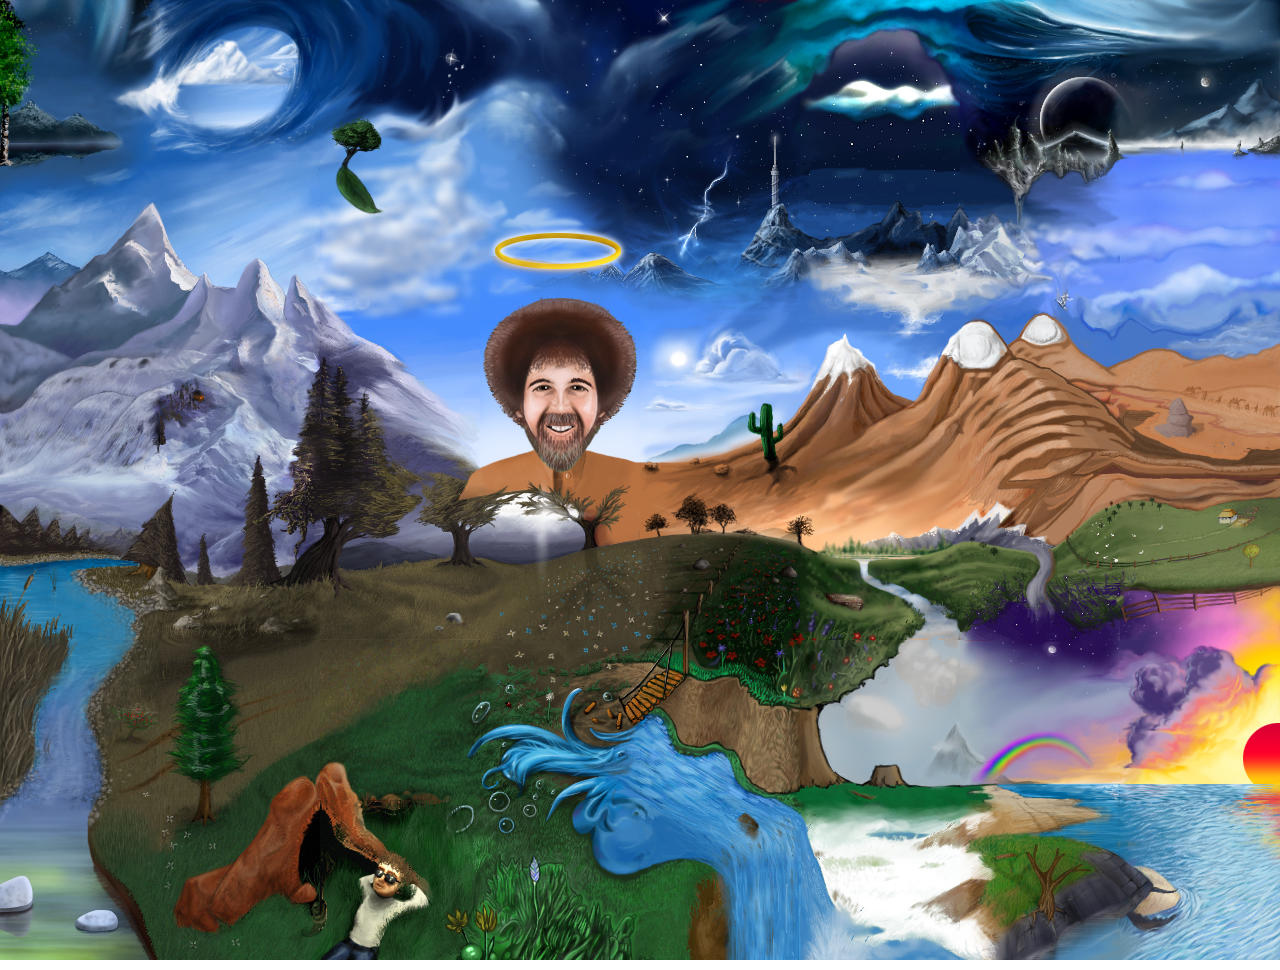 Wallpaper forest the sky water trees landscape mountains lake  picture painting peak Bob Ross Bob Ross images for desktop section  живопись  download